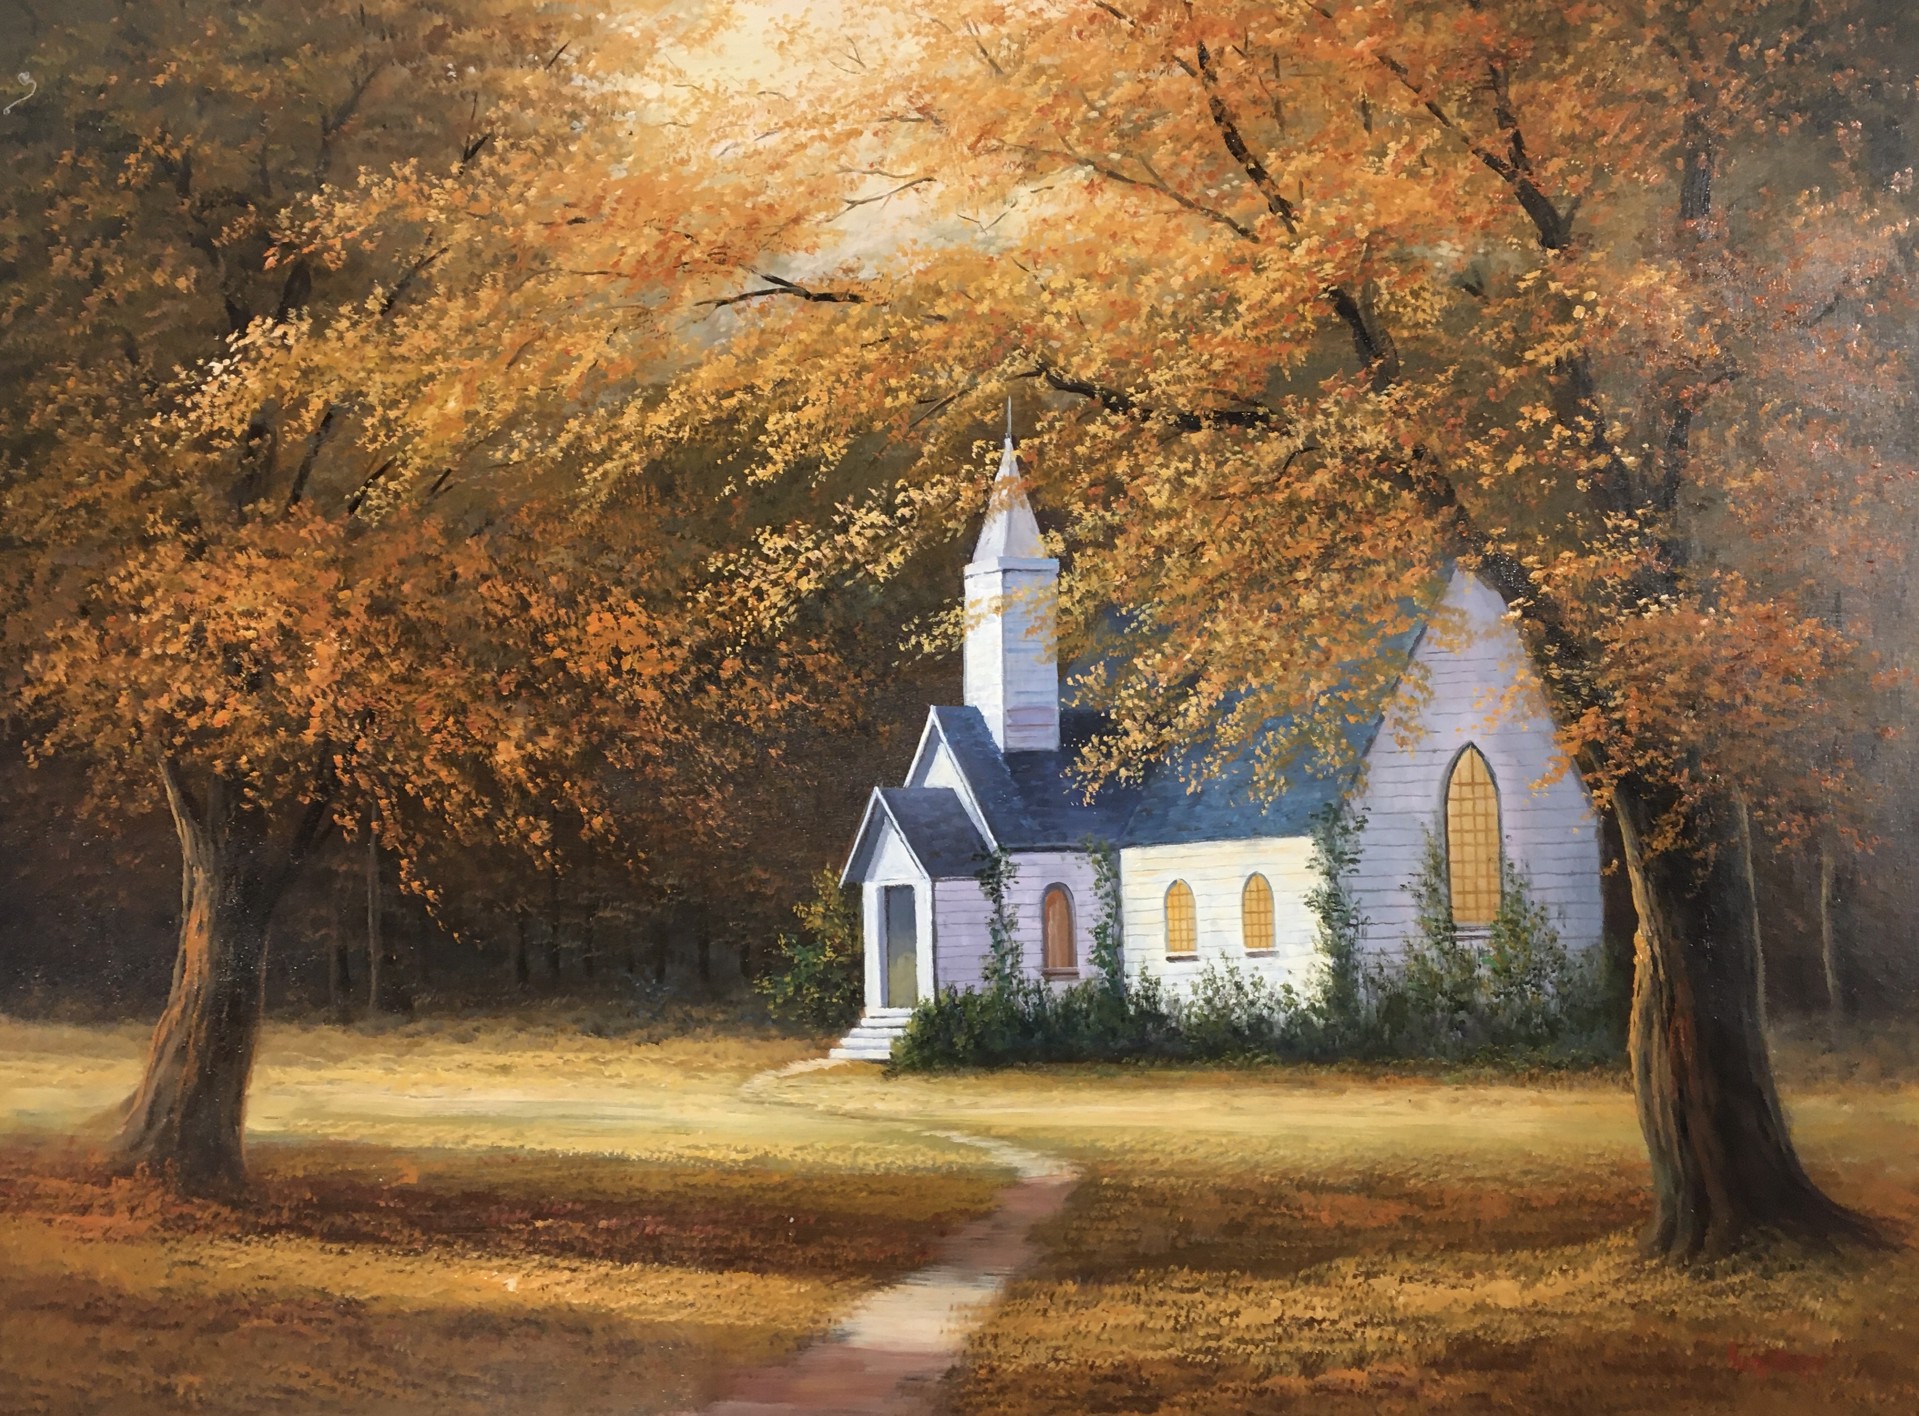 LITTLE CHURCH IN THE COUNTRY by HUMPHREY